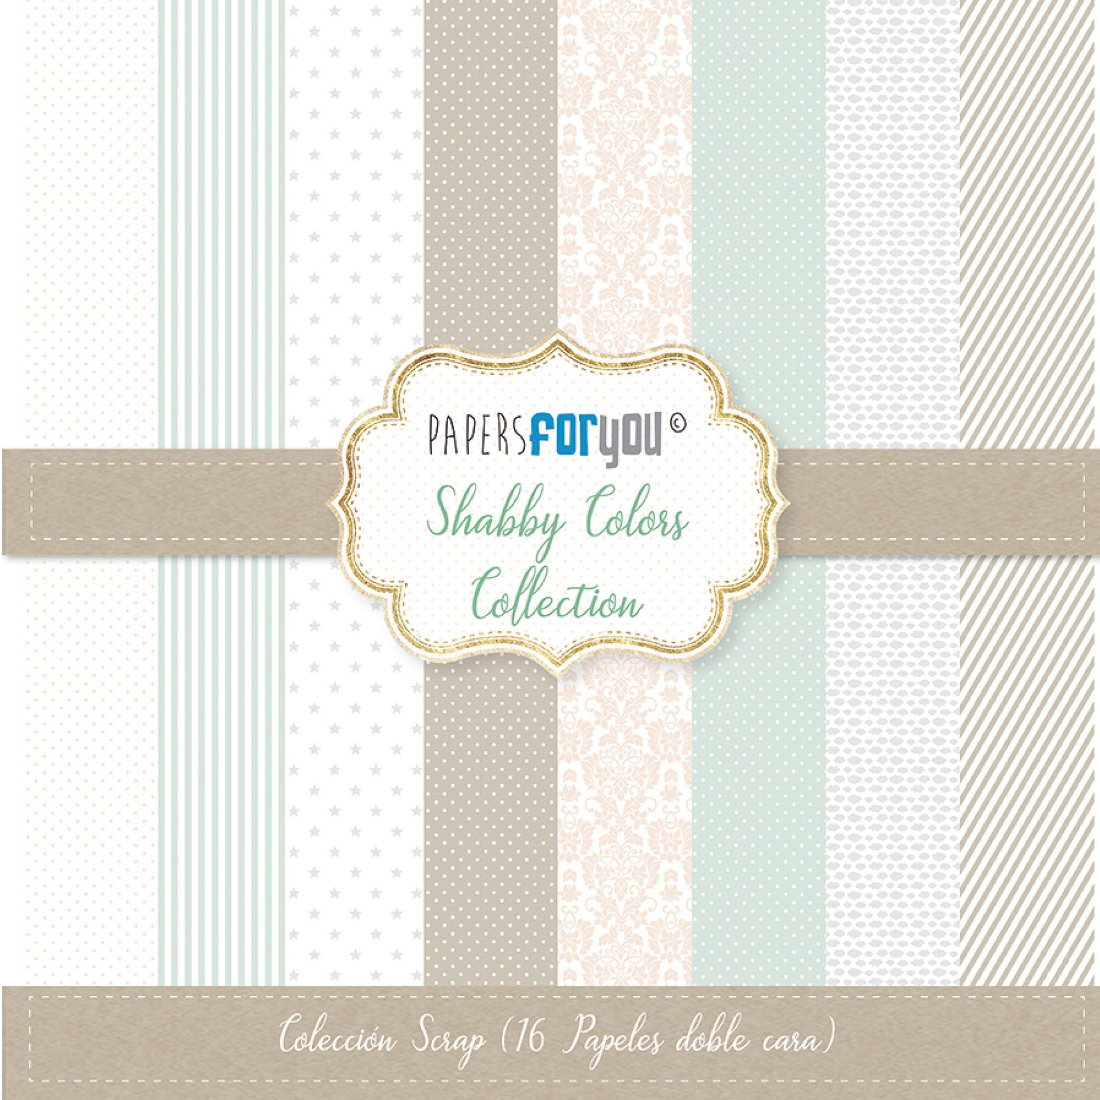 Bloco Papel Scrapbooking Shabby Colors PFY-1434 papersforyou